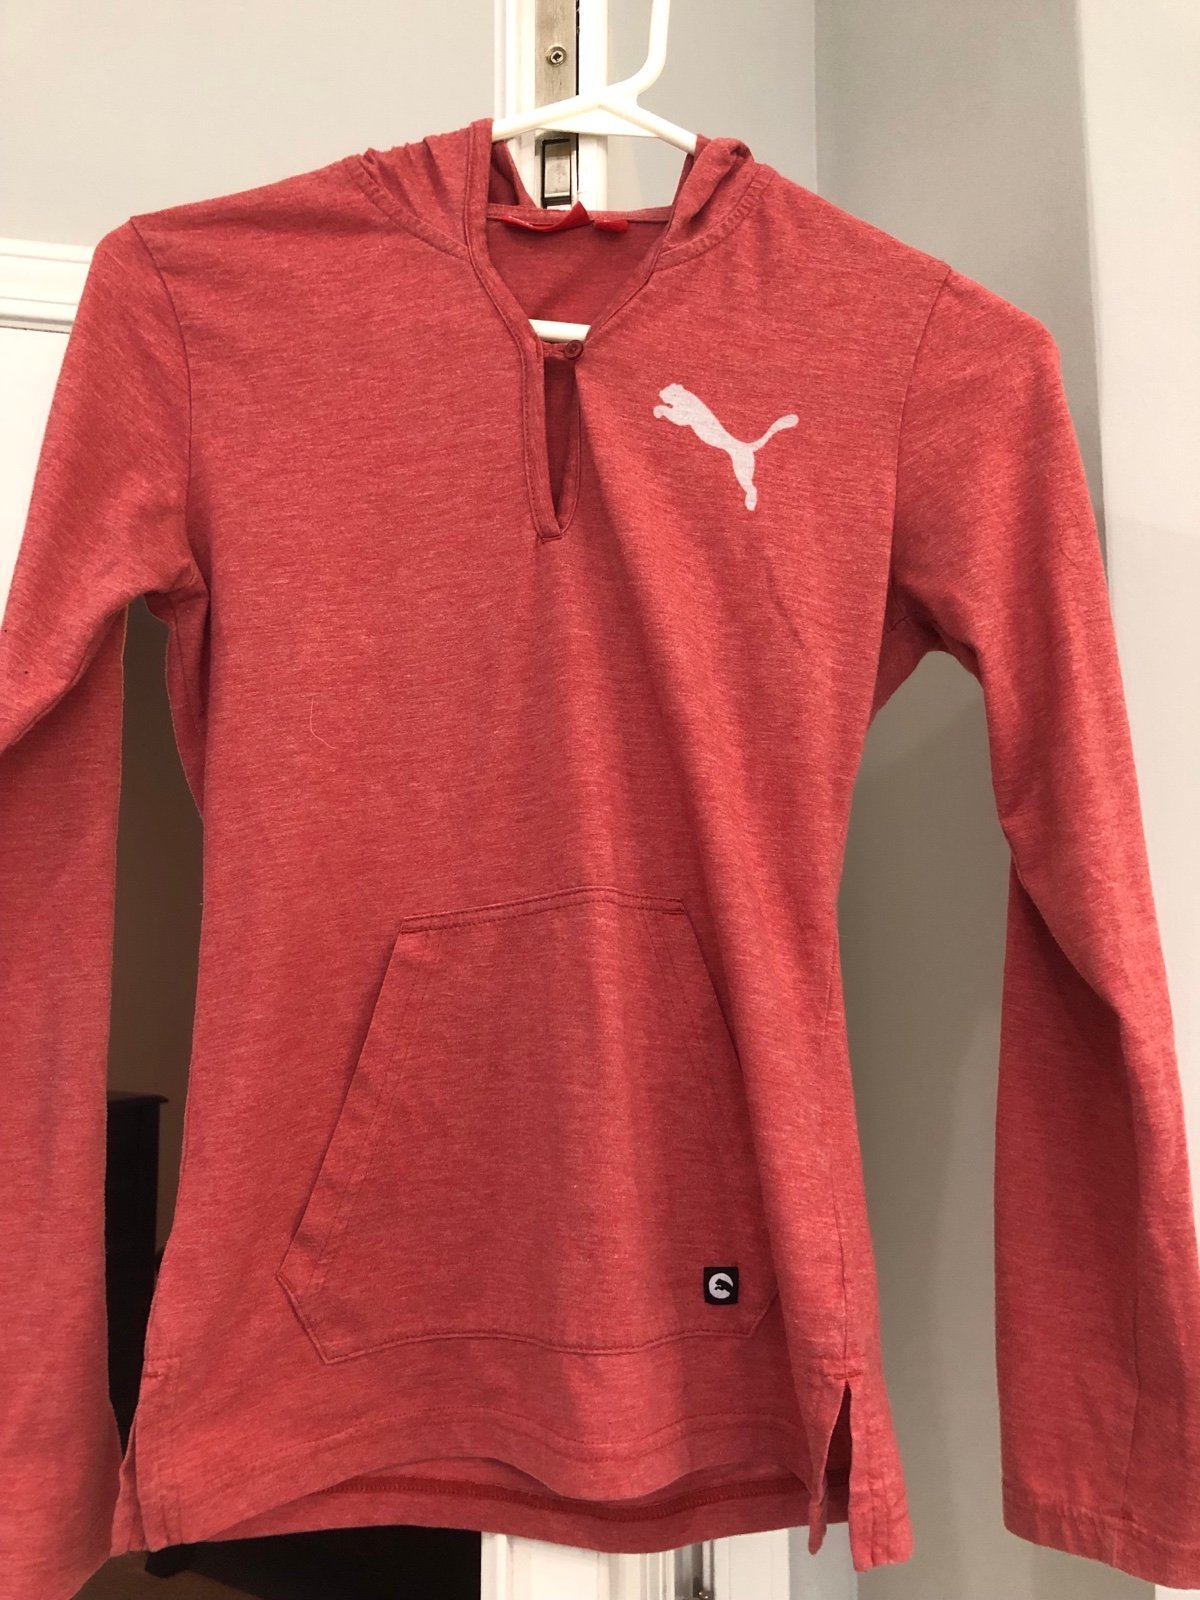 Special offer  Women’s size XS Puma Long Sleeve Athleti